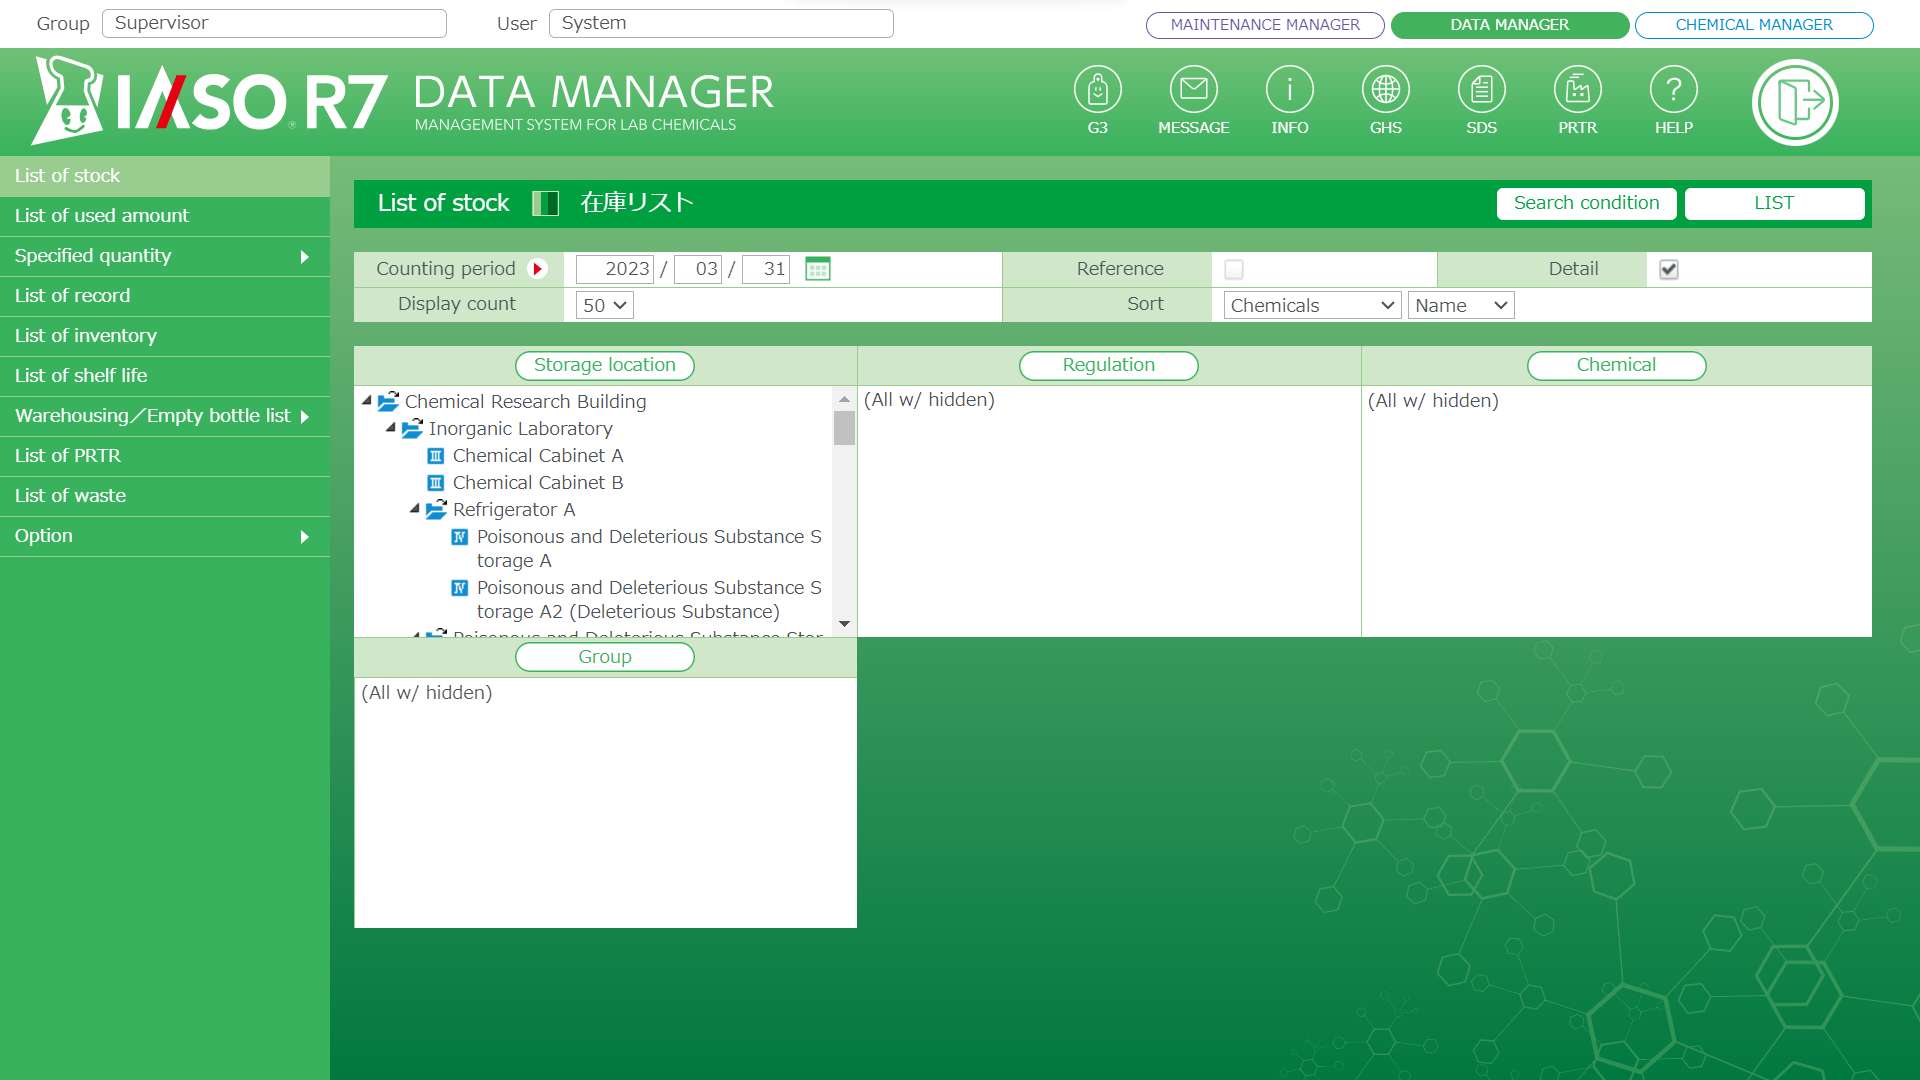 DATA MANAGER